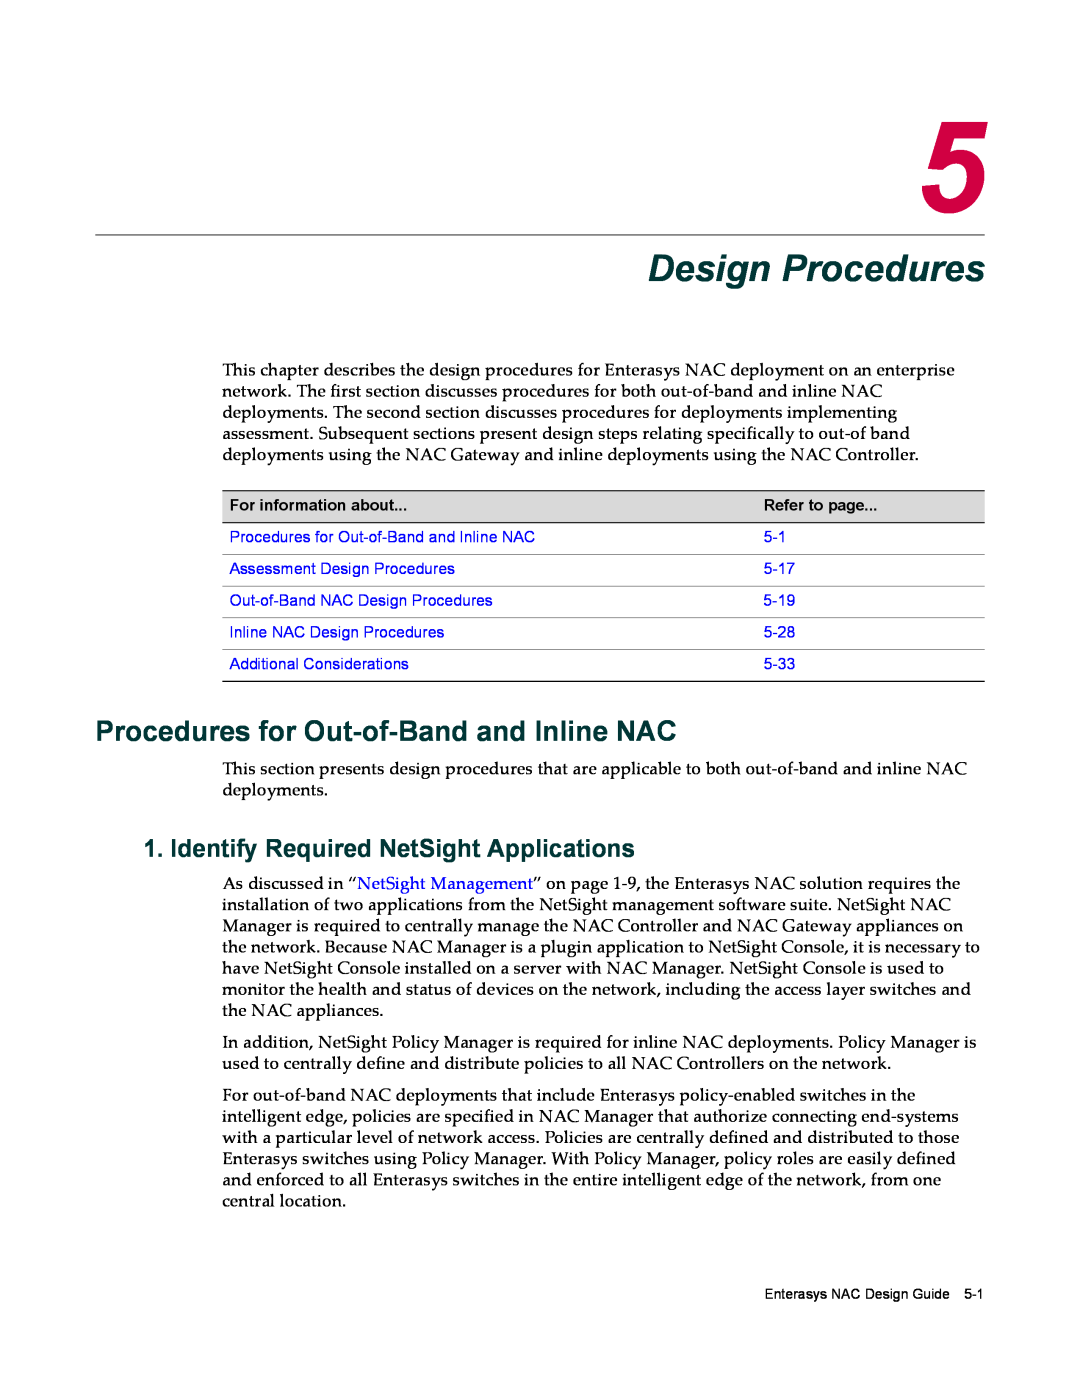 Enterasys Networks 9034385 manual Design Procedures, Procedures for Out-of-Band and Inline NAC 